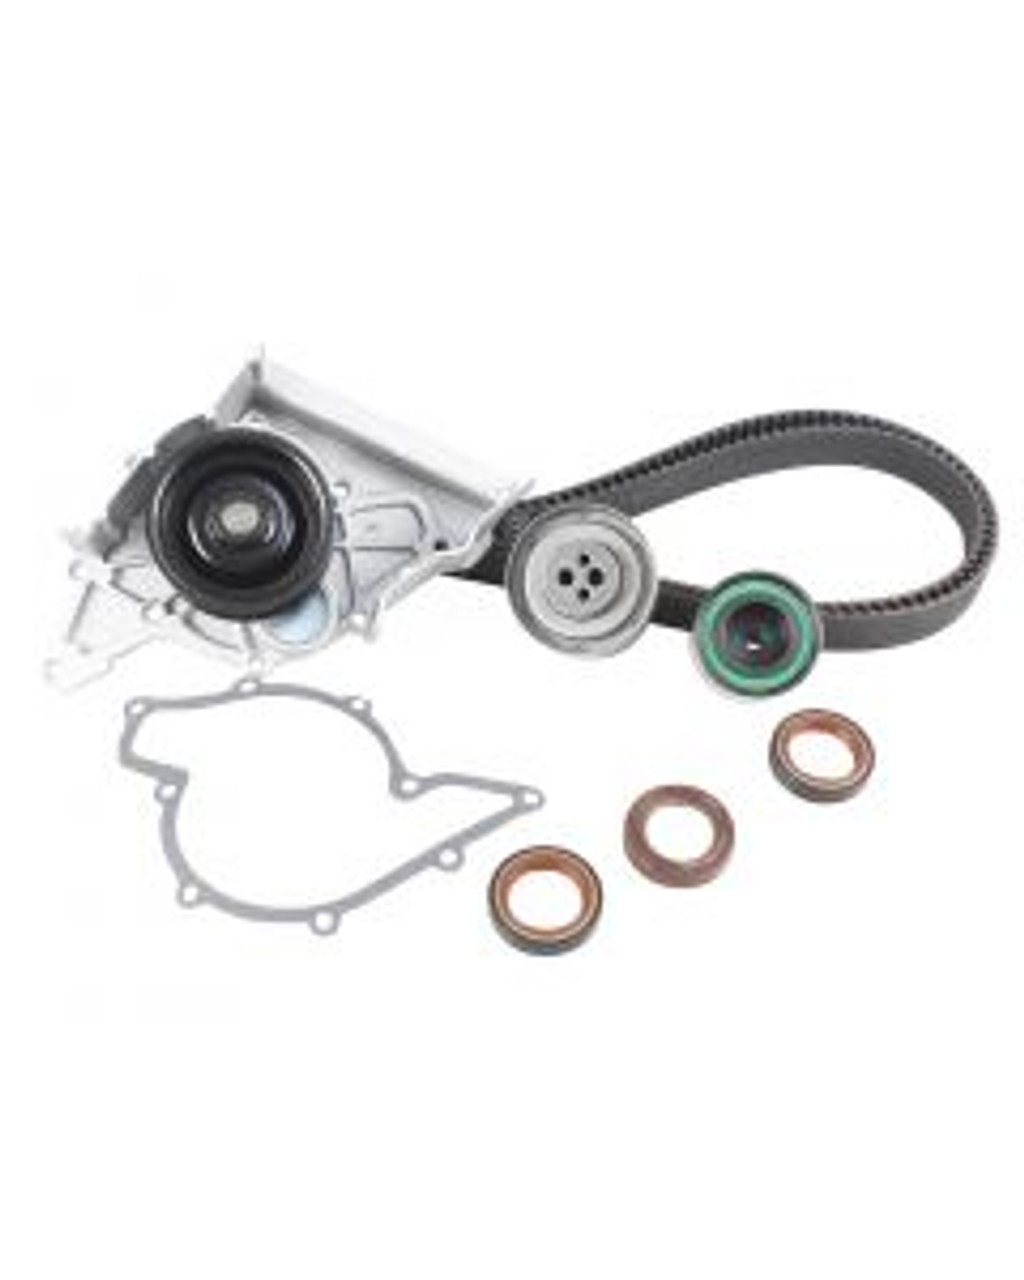 1994 Audi Cabriolet 2.8L Timing Belt Kit with Water Pump TBK806WP.E13